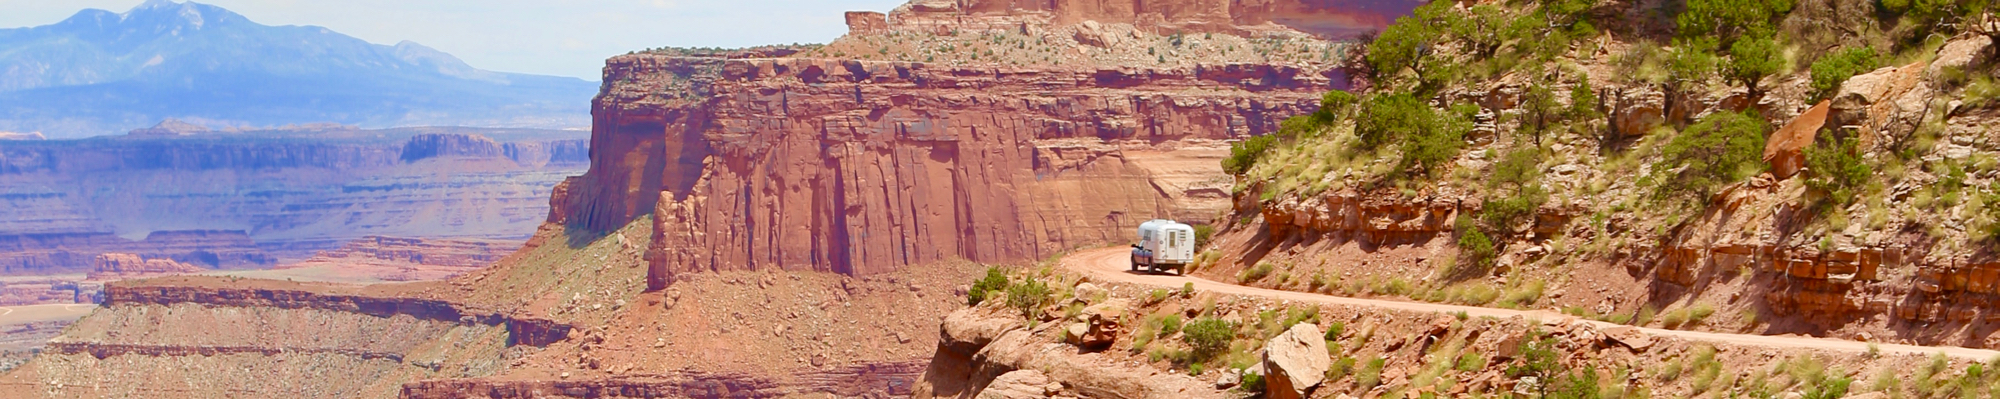 1970 Avion C11 truck camper traveling down Shafer Trail in Canyonlands National Park.